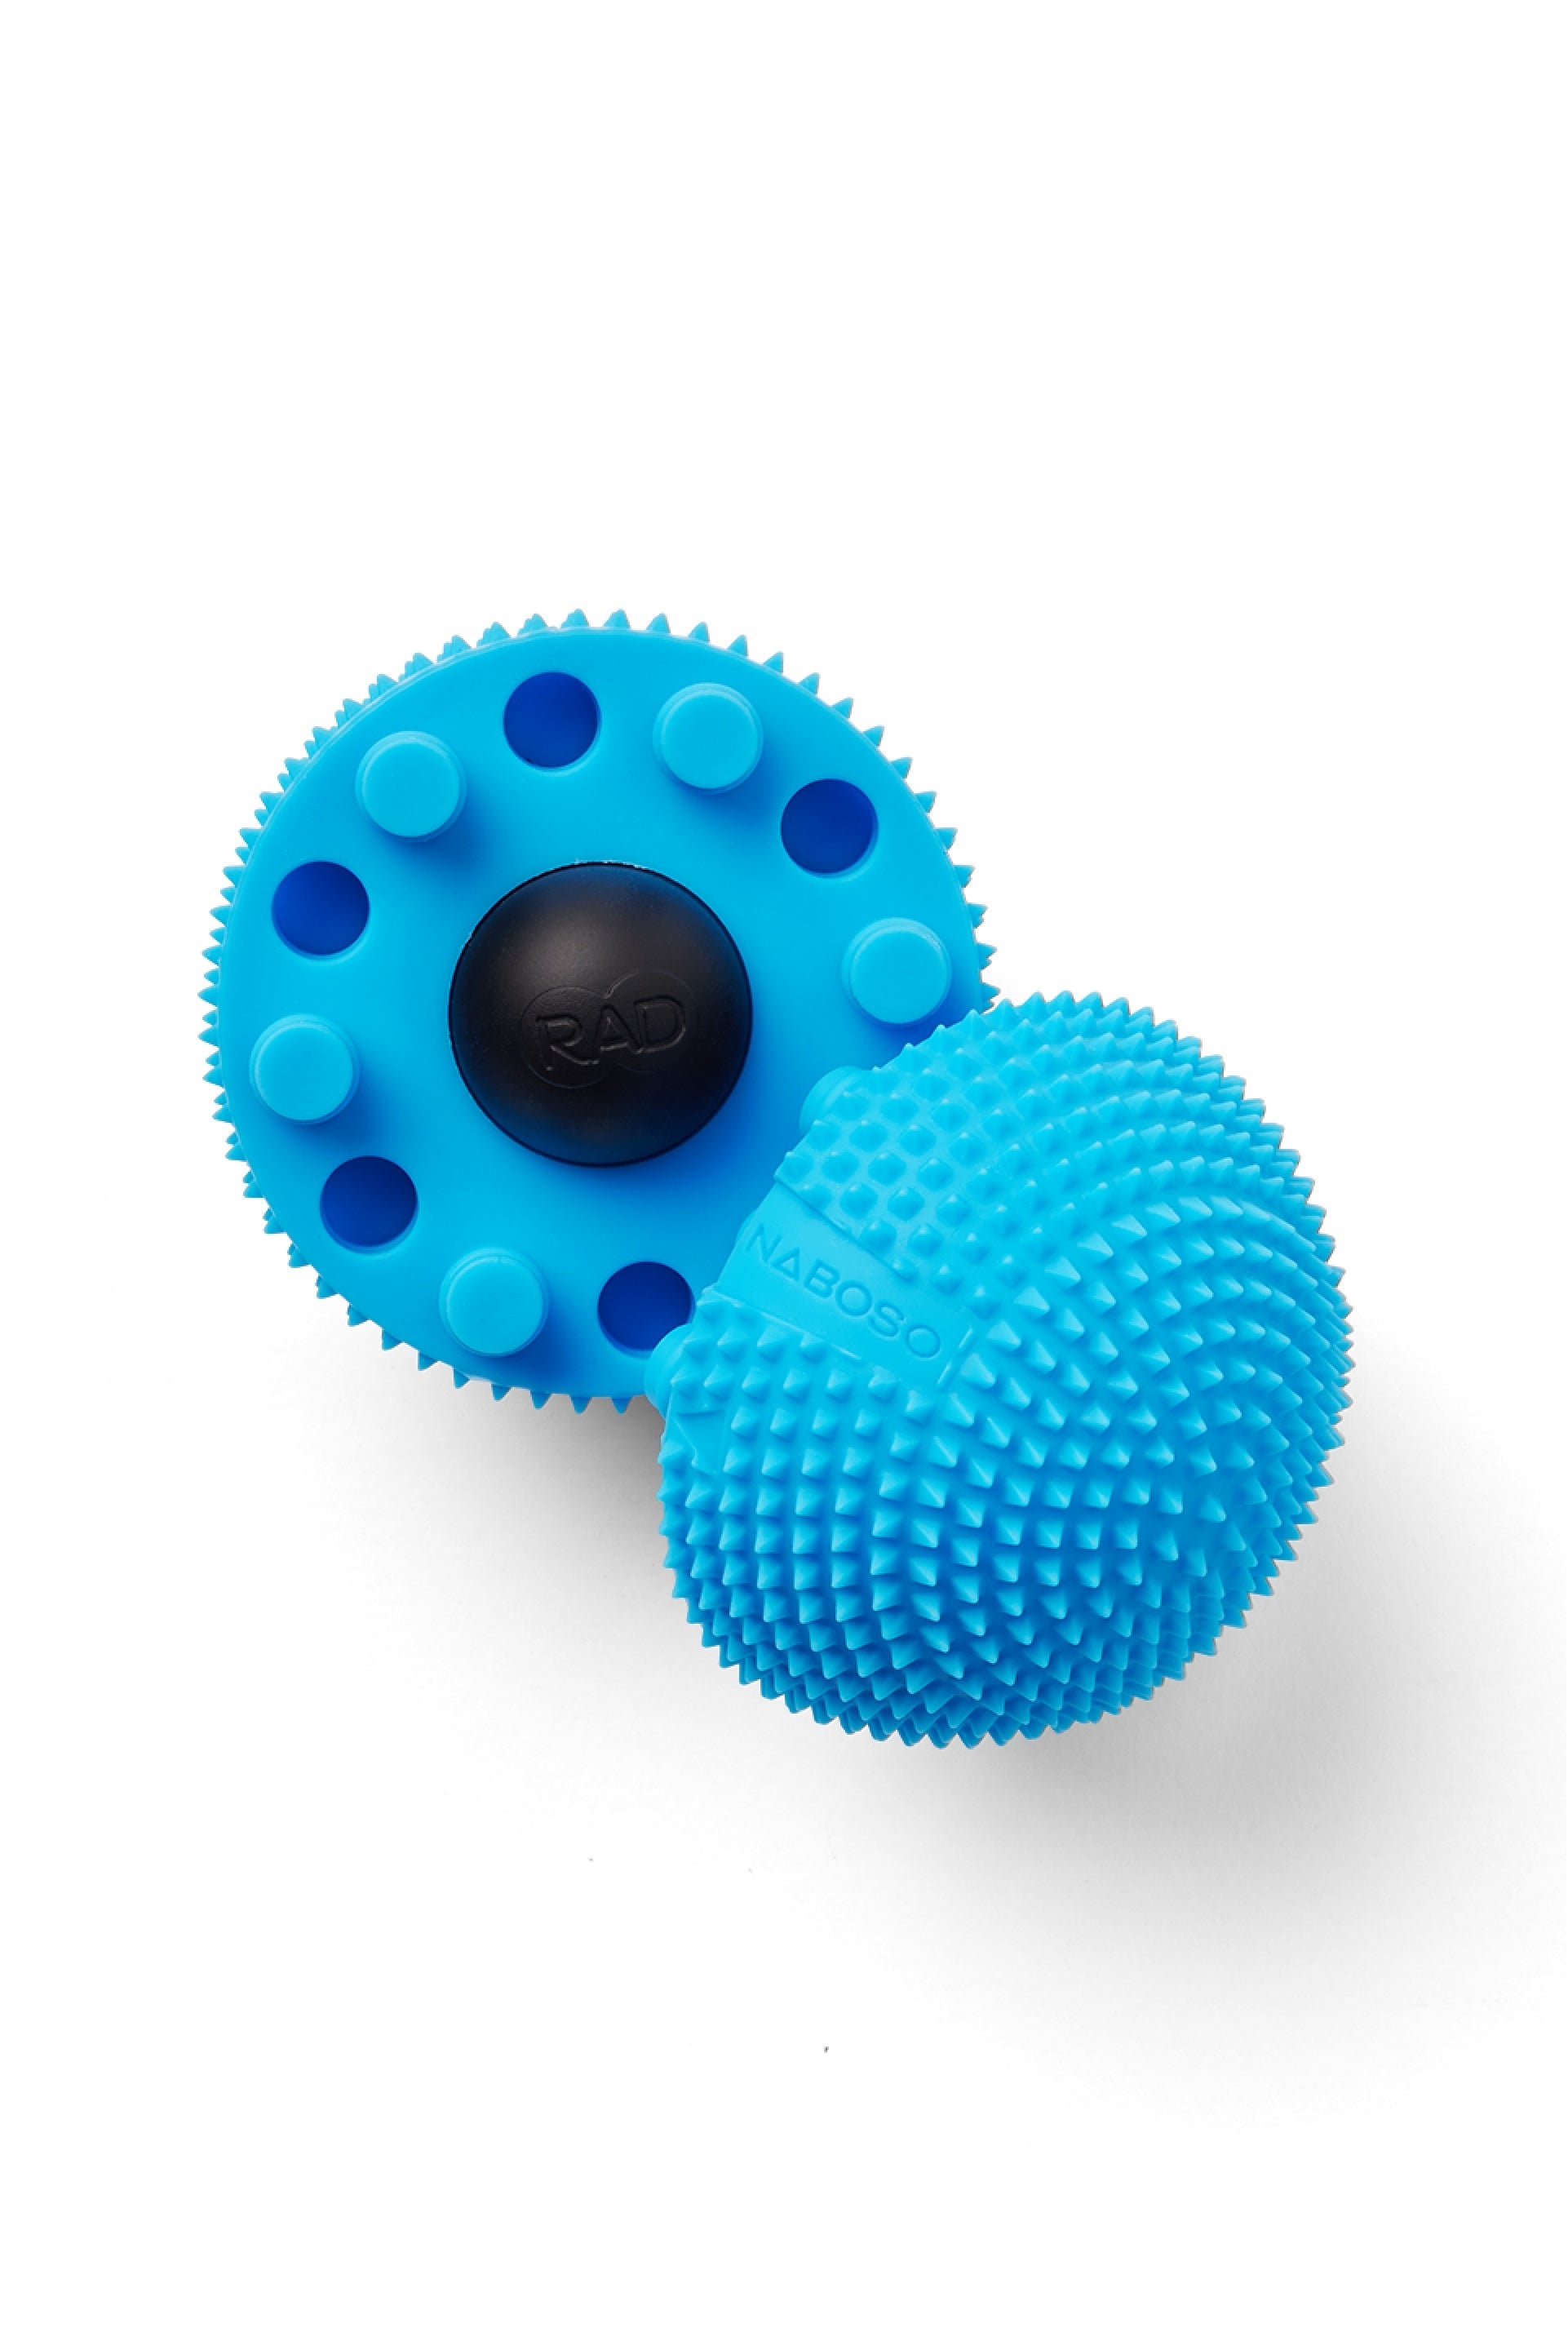 The blue Neuro Ball split in two demonstrating how it can be taken apart